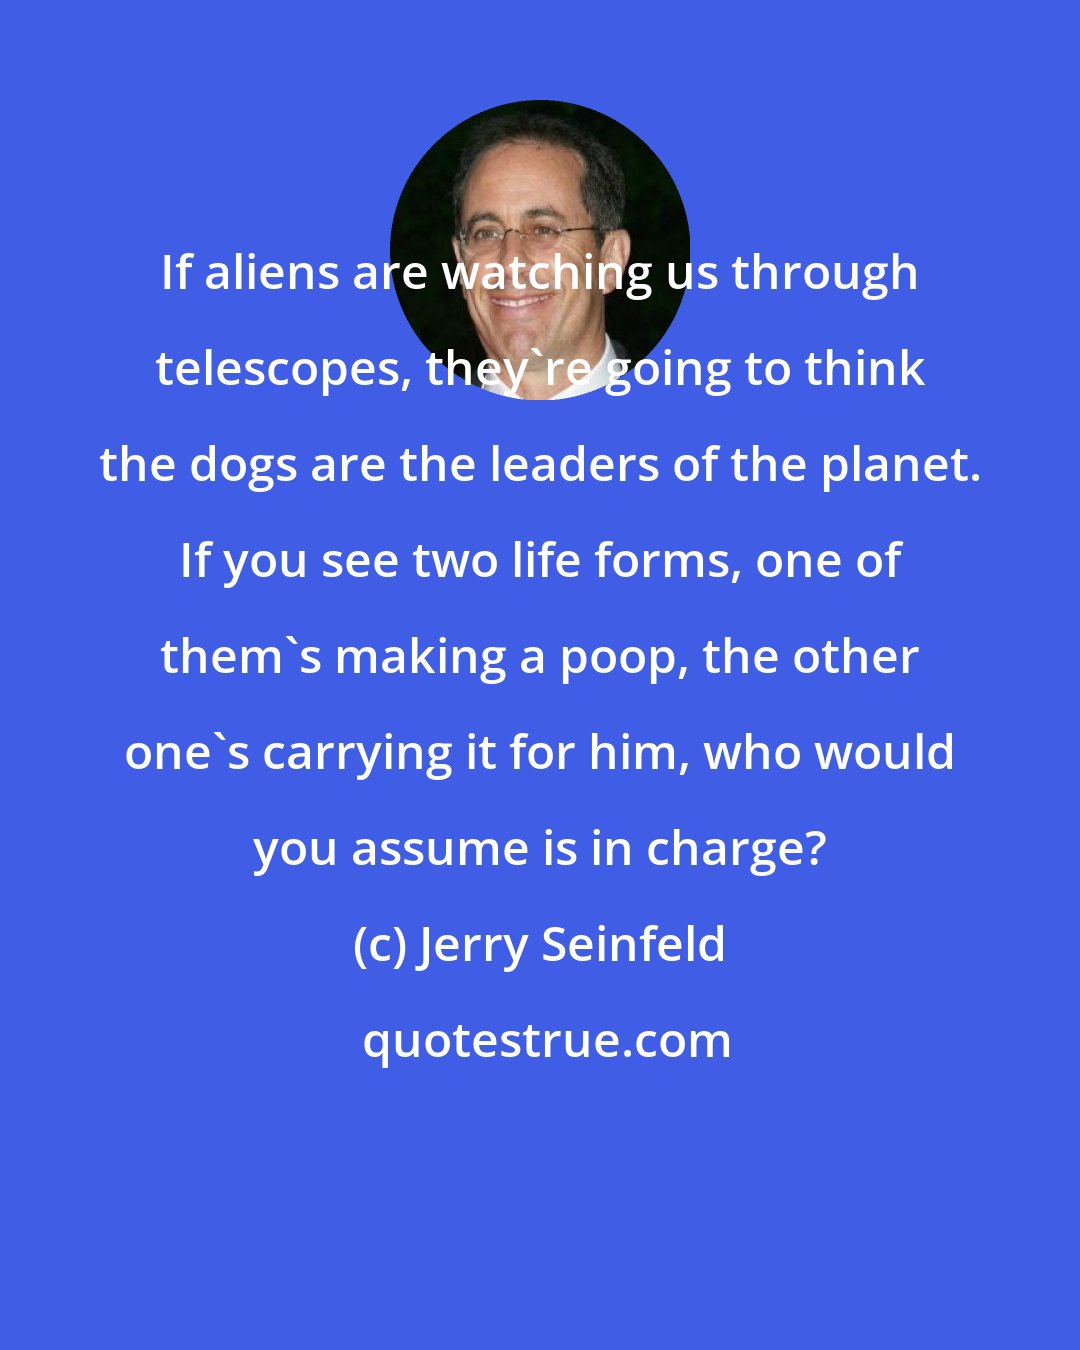 Jerry Seinfeld: If aliens are watching us through telescopes, they're going to think the dogs are the leaders of the planet. If you see two life forms, one of them's making a poop, the other one's carrying it for him, who would you assume is in charge?